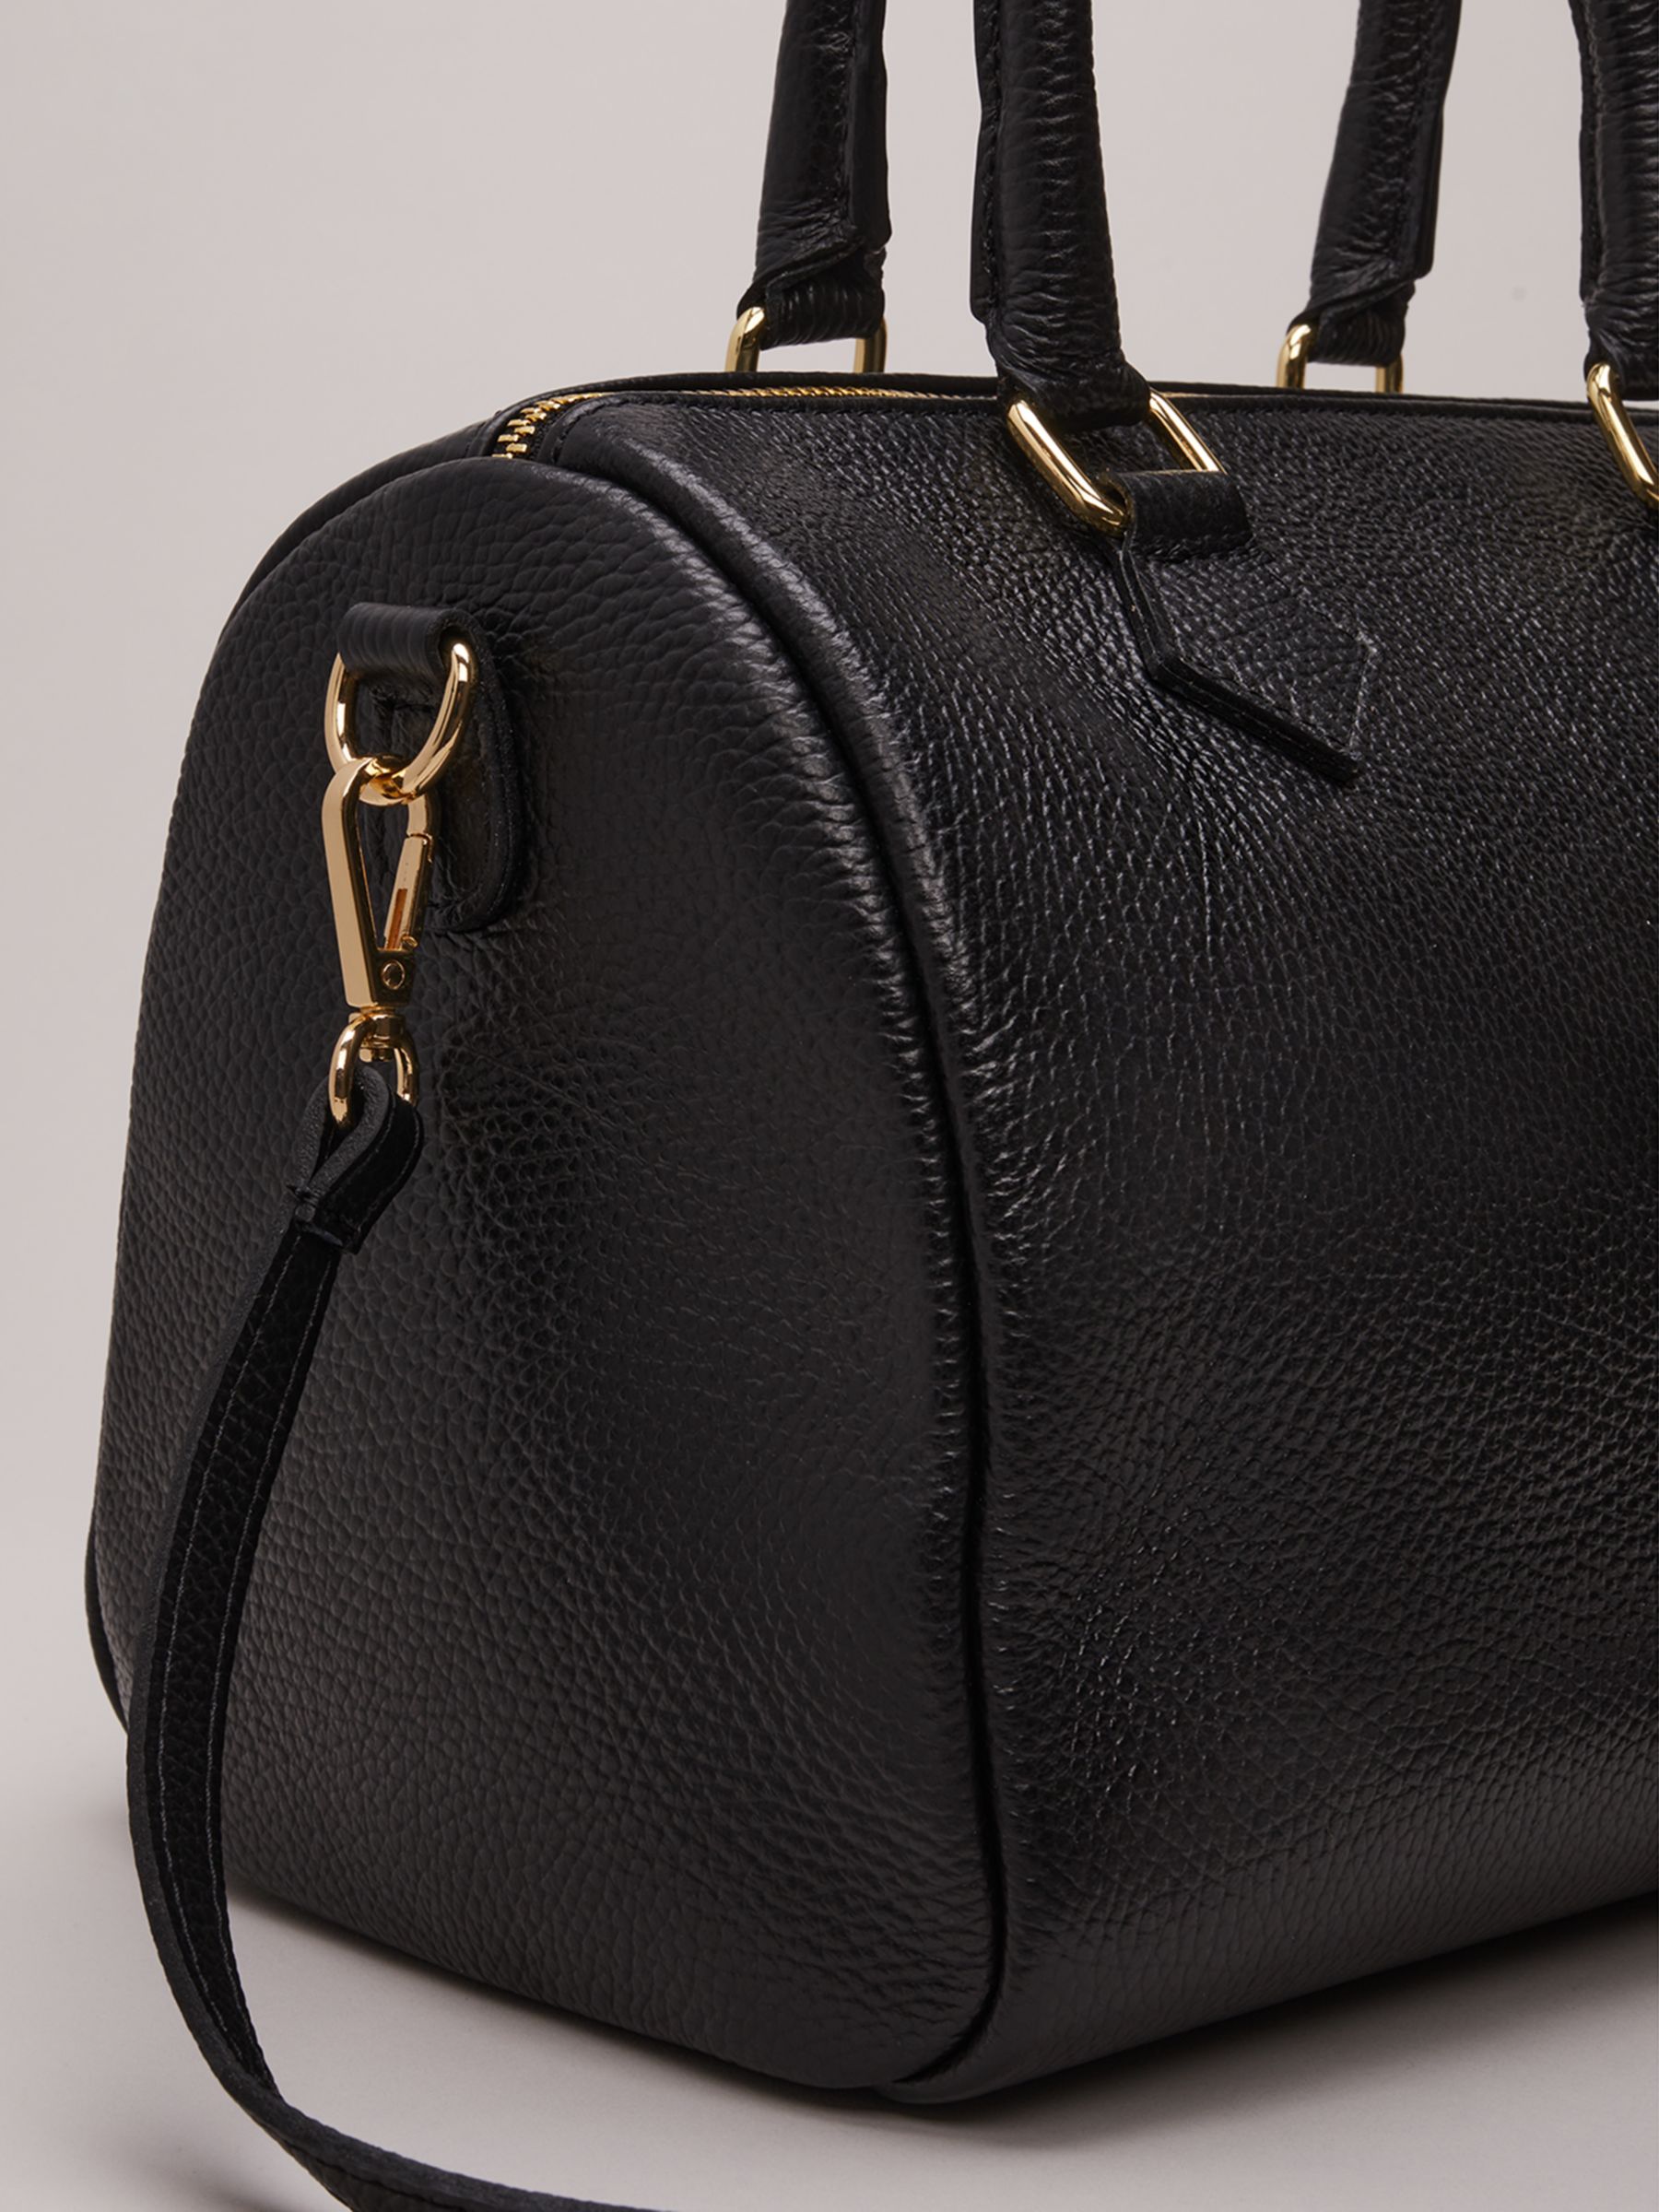 Buy Phase Eight Leather Bowling Bag, Black Online at johnlewis.com